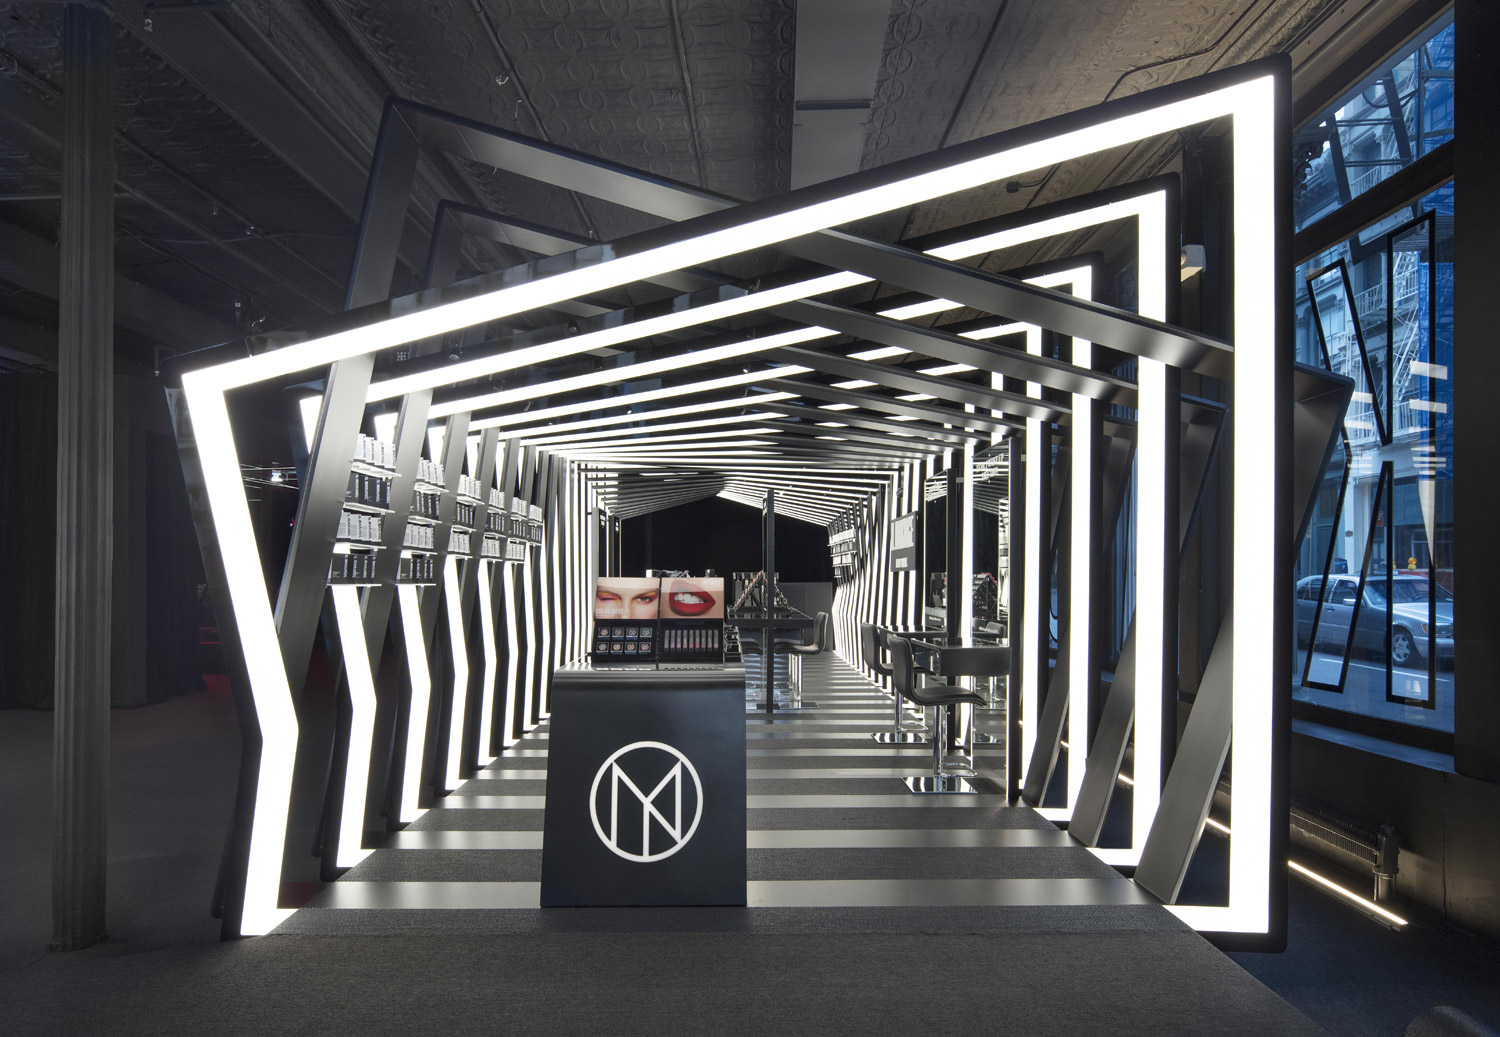 Distinctive Packaging Inspires Zaha Hadid Architects’ Retail Design Concept